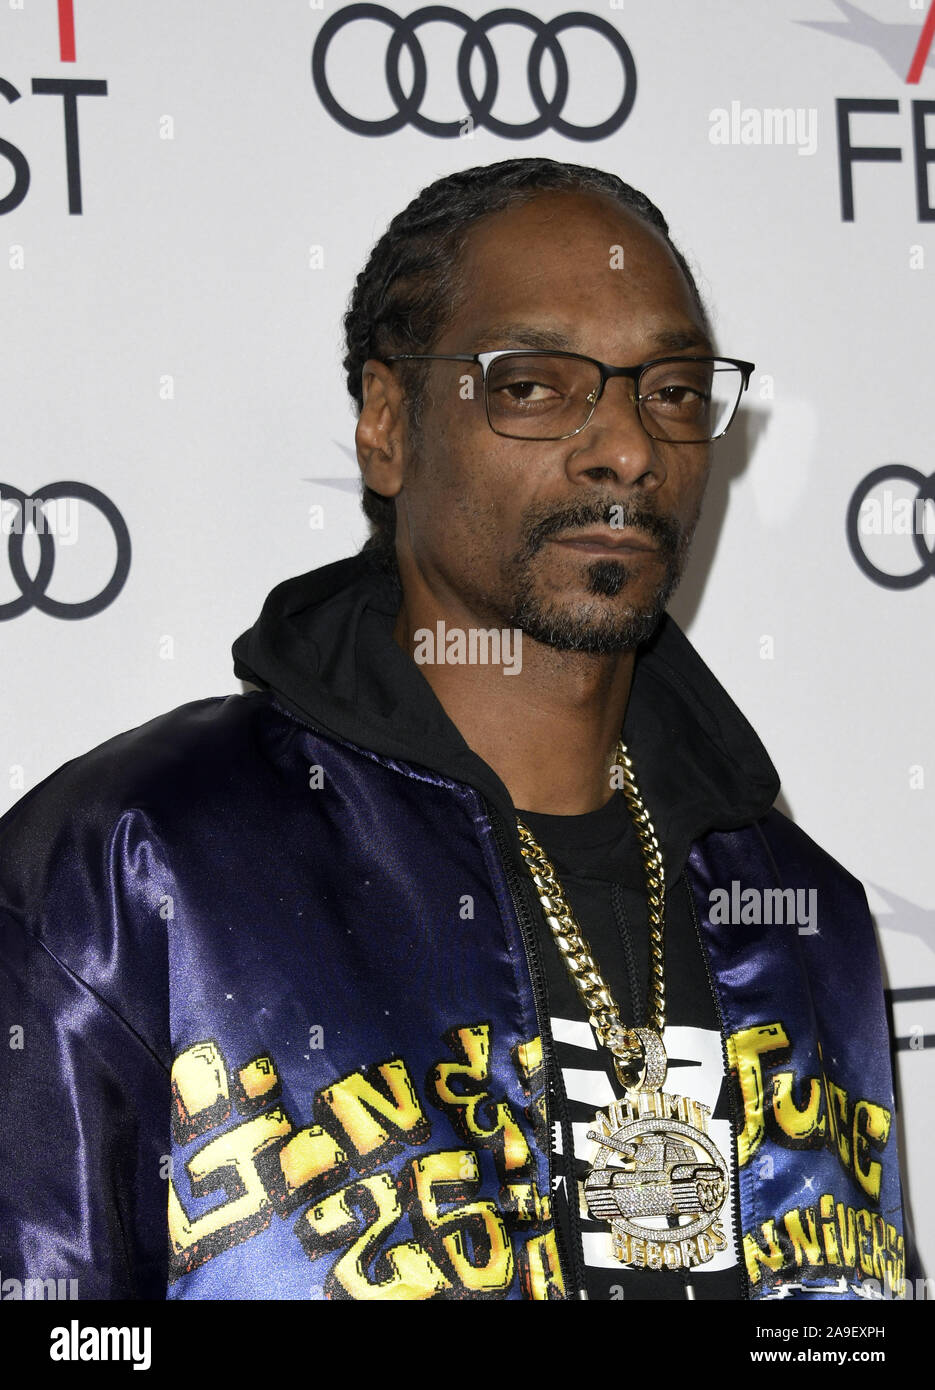 HOLLYWOOD, CA - NOVEMBER 14: Snoop Dogg, at AFI FEST 2019 Presented By Audi - 'Queen & Slim' Premiere at TCL Chinese Theatre in Hollywood, California on November 14, 2019. Credit Faye Sadou/MediaPunch Stock Photo